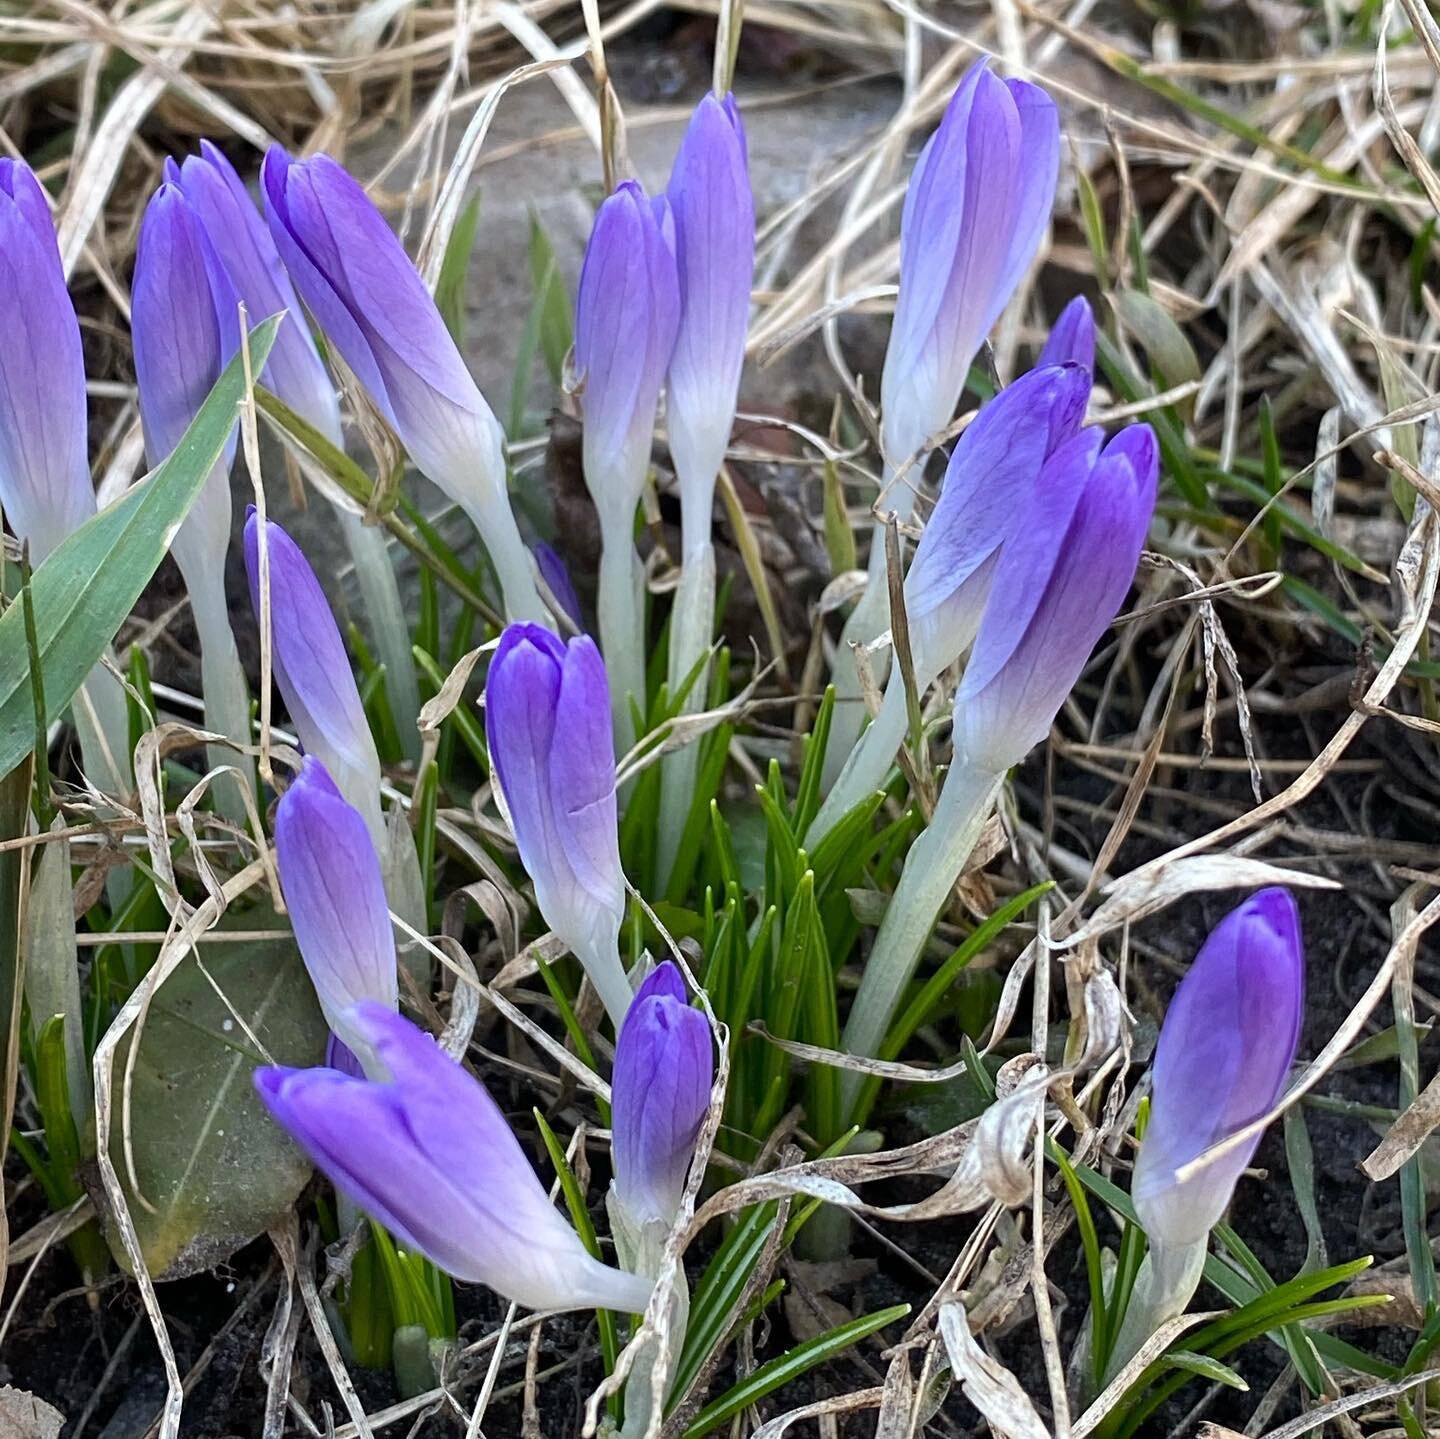 First signs of spring! 🌱 Early crocus and skunk cabbage both start blooming in late winter. #dorchesterontario #spring